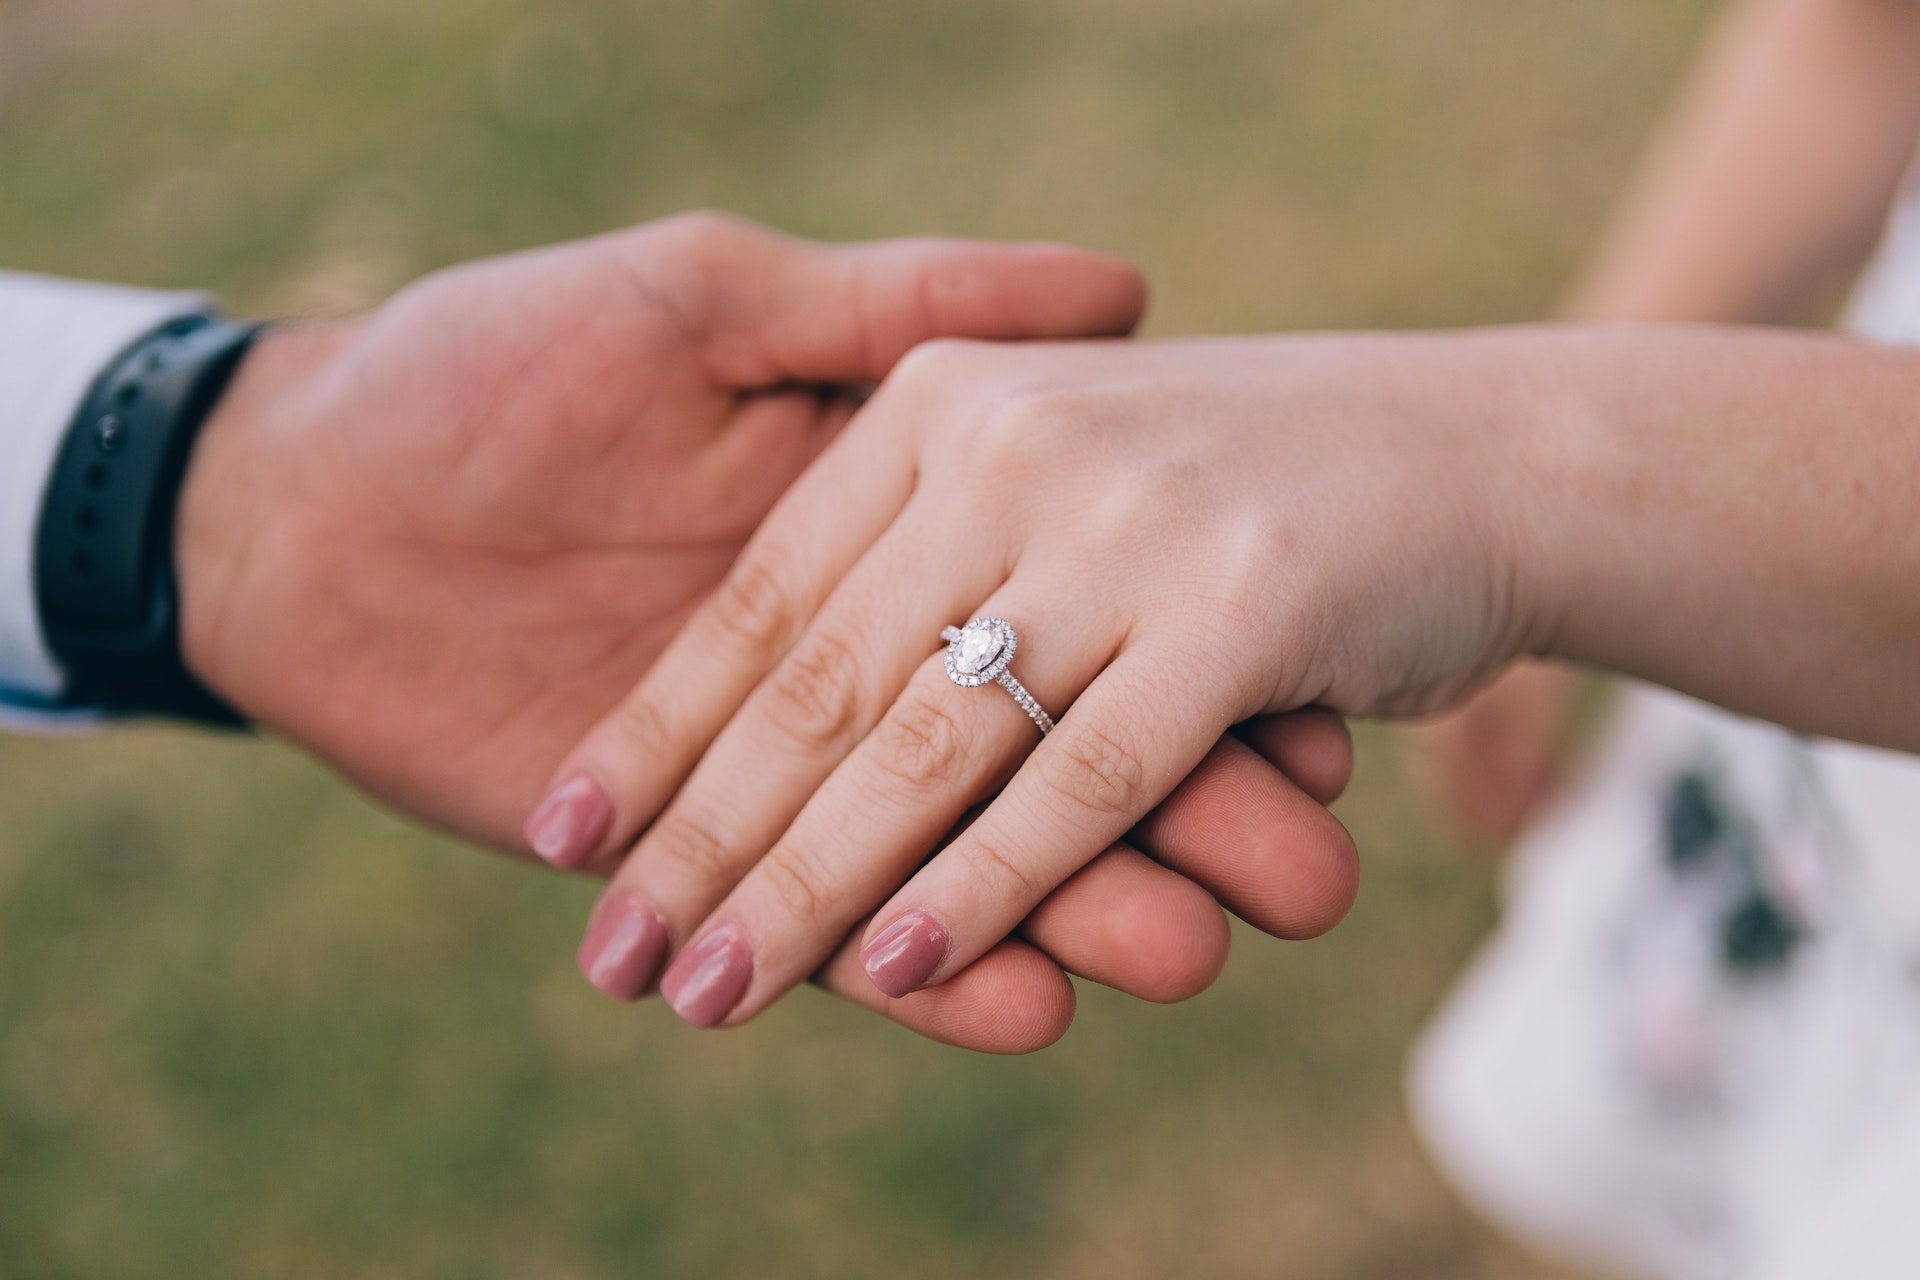 Design Your Dream Engagement Ring: Tips and Tricks For Creating The Perfect Custom Ring